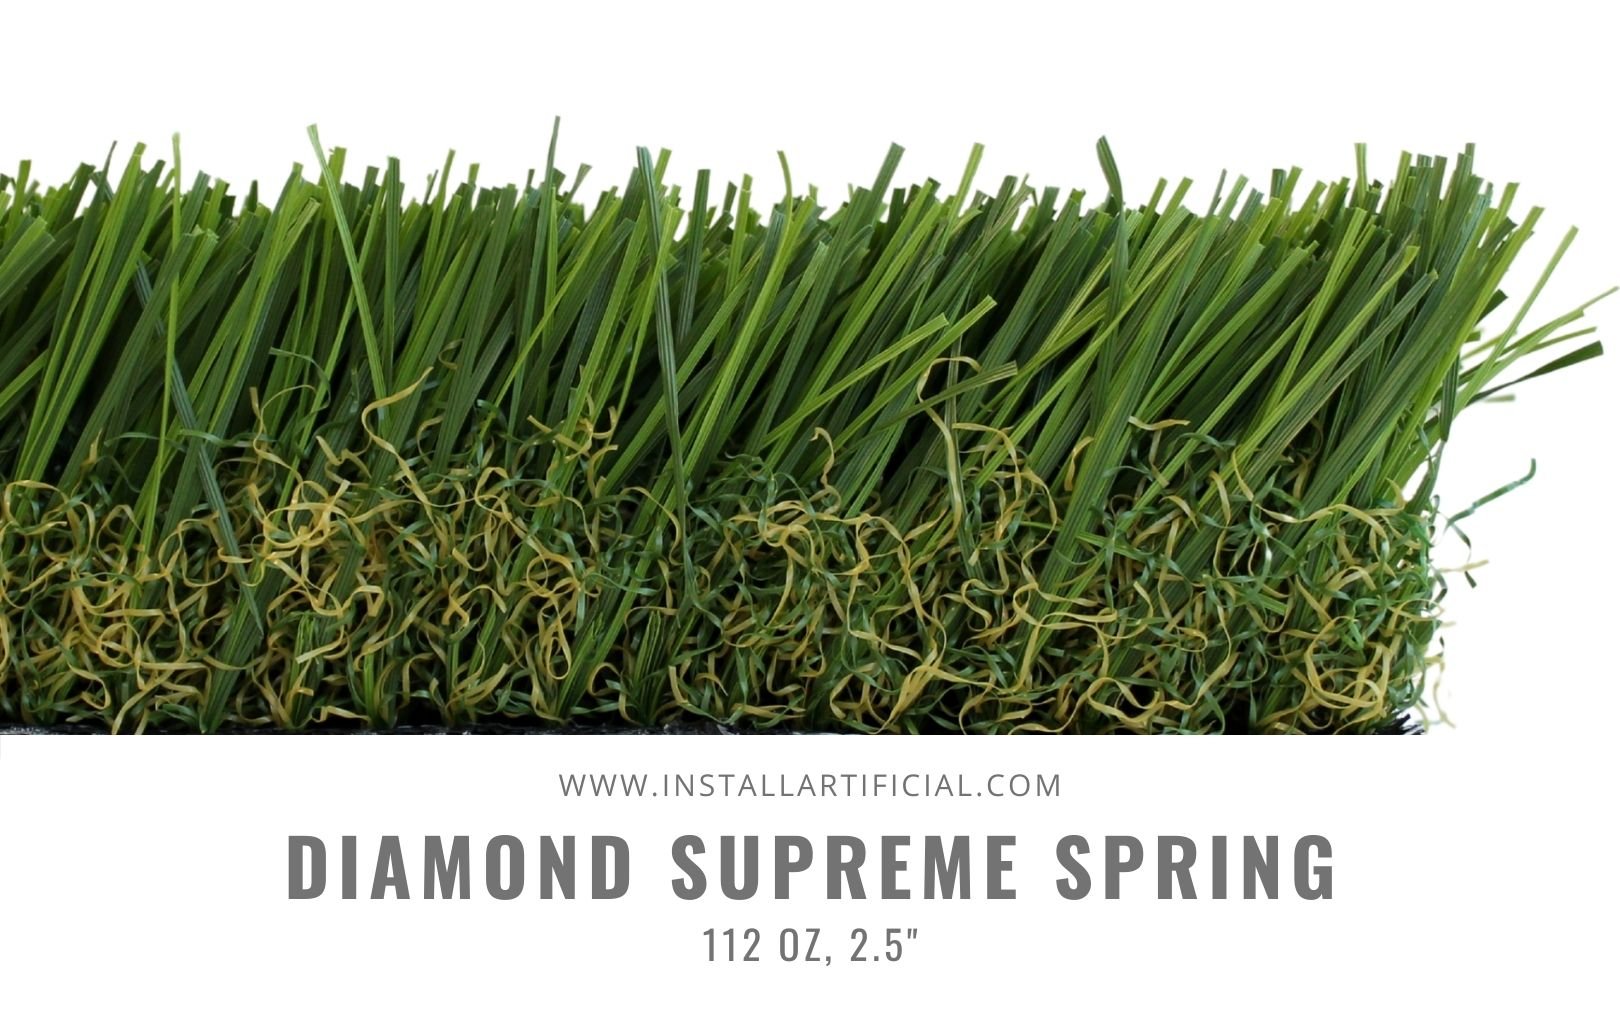 Diamond Supreme Spring, Synthetic Grass Warehouse, Tiger Turf, side